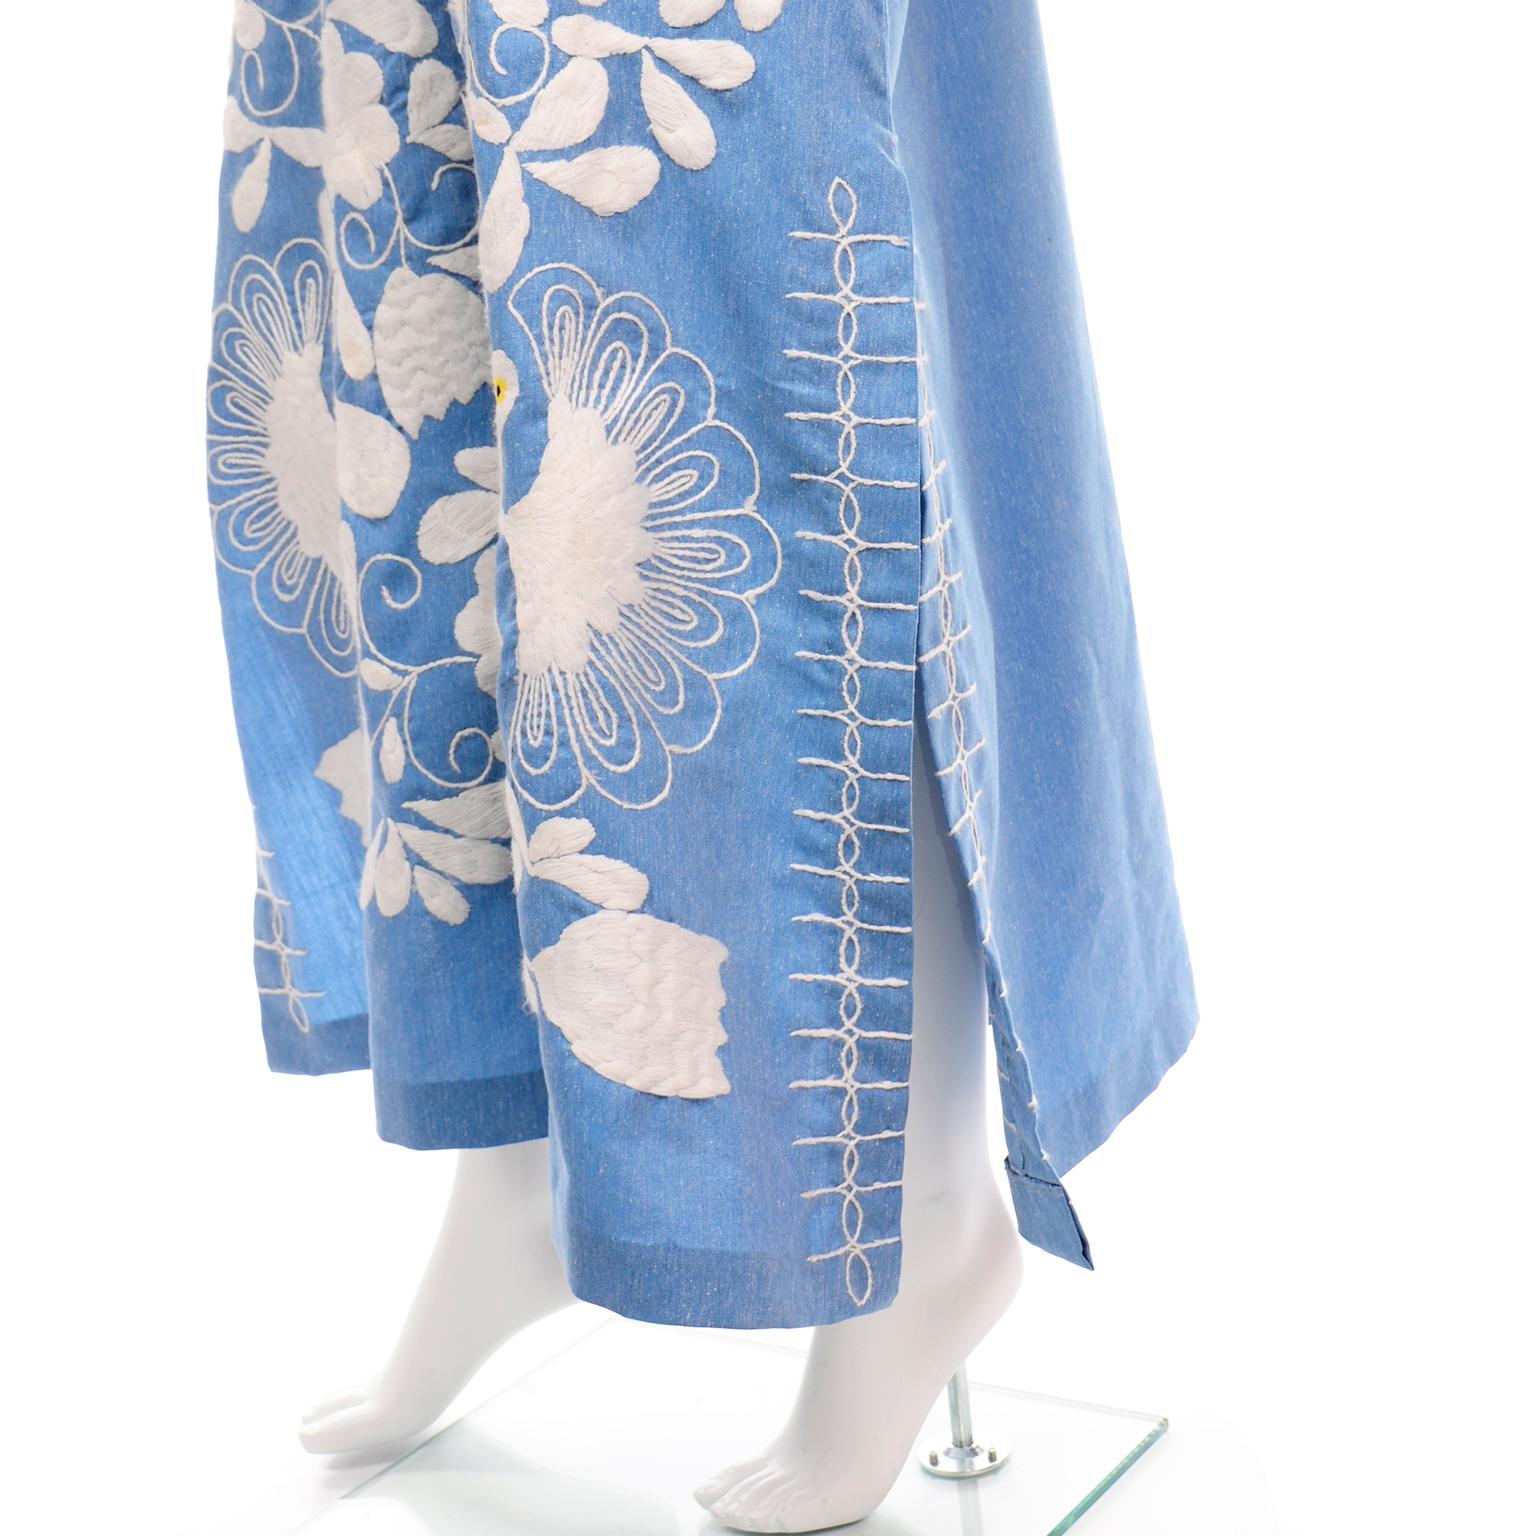 Vintage Embroidered Blue and White Caftan Dress With Floral Bird Motif 2